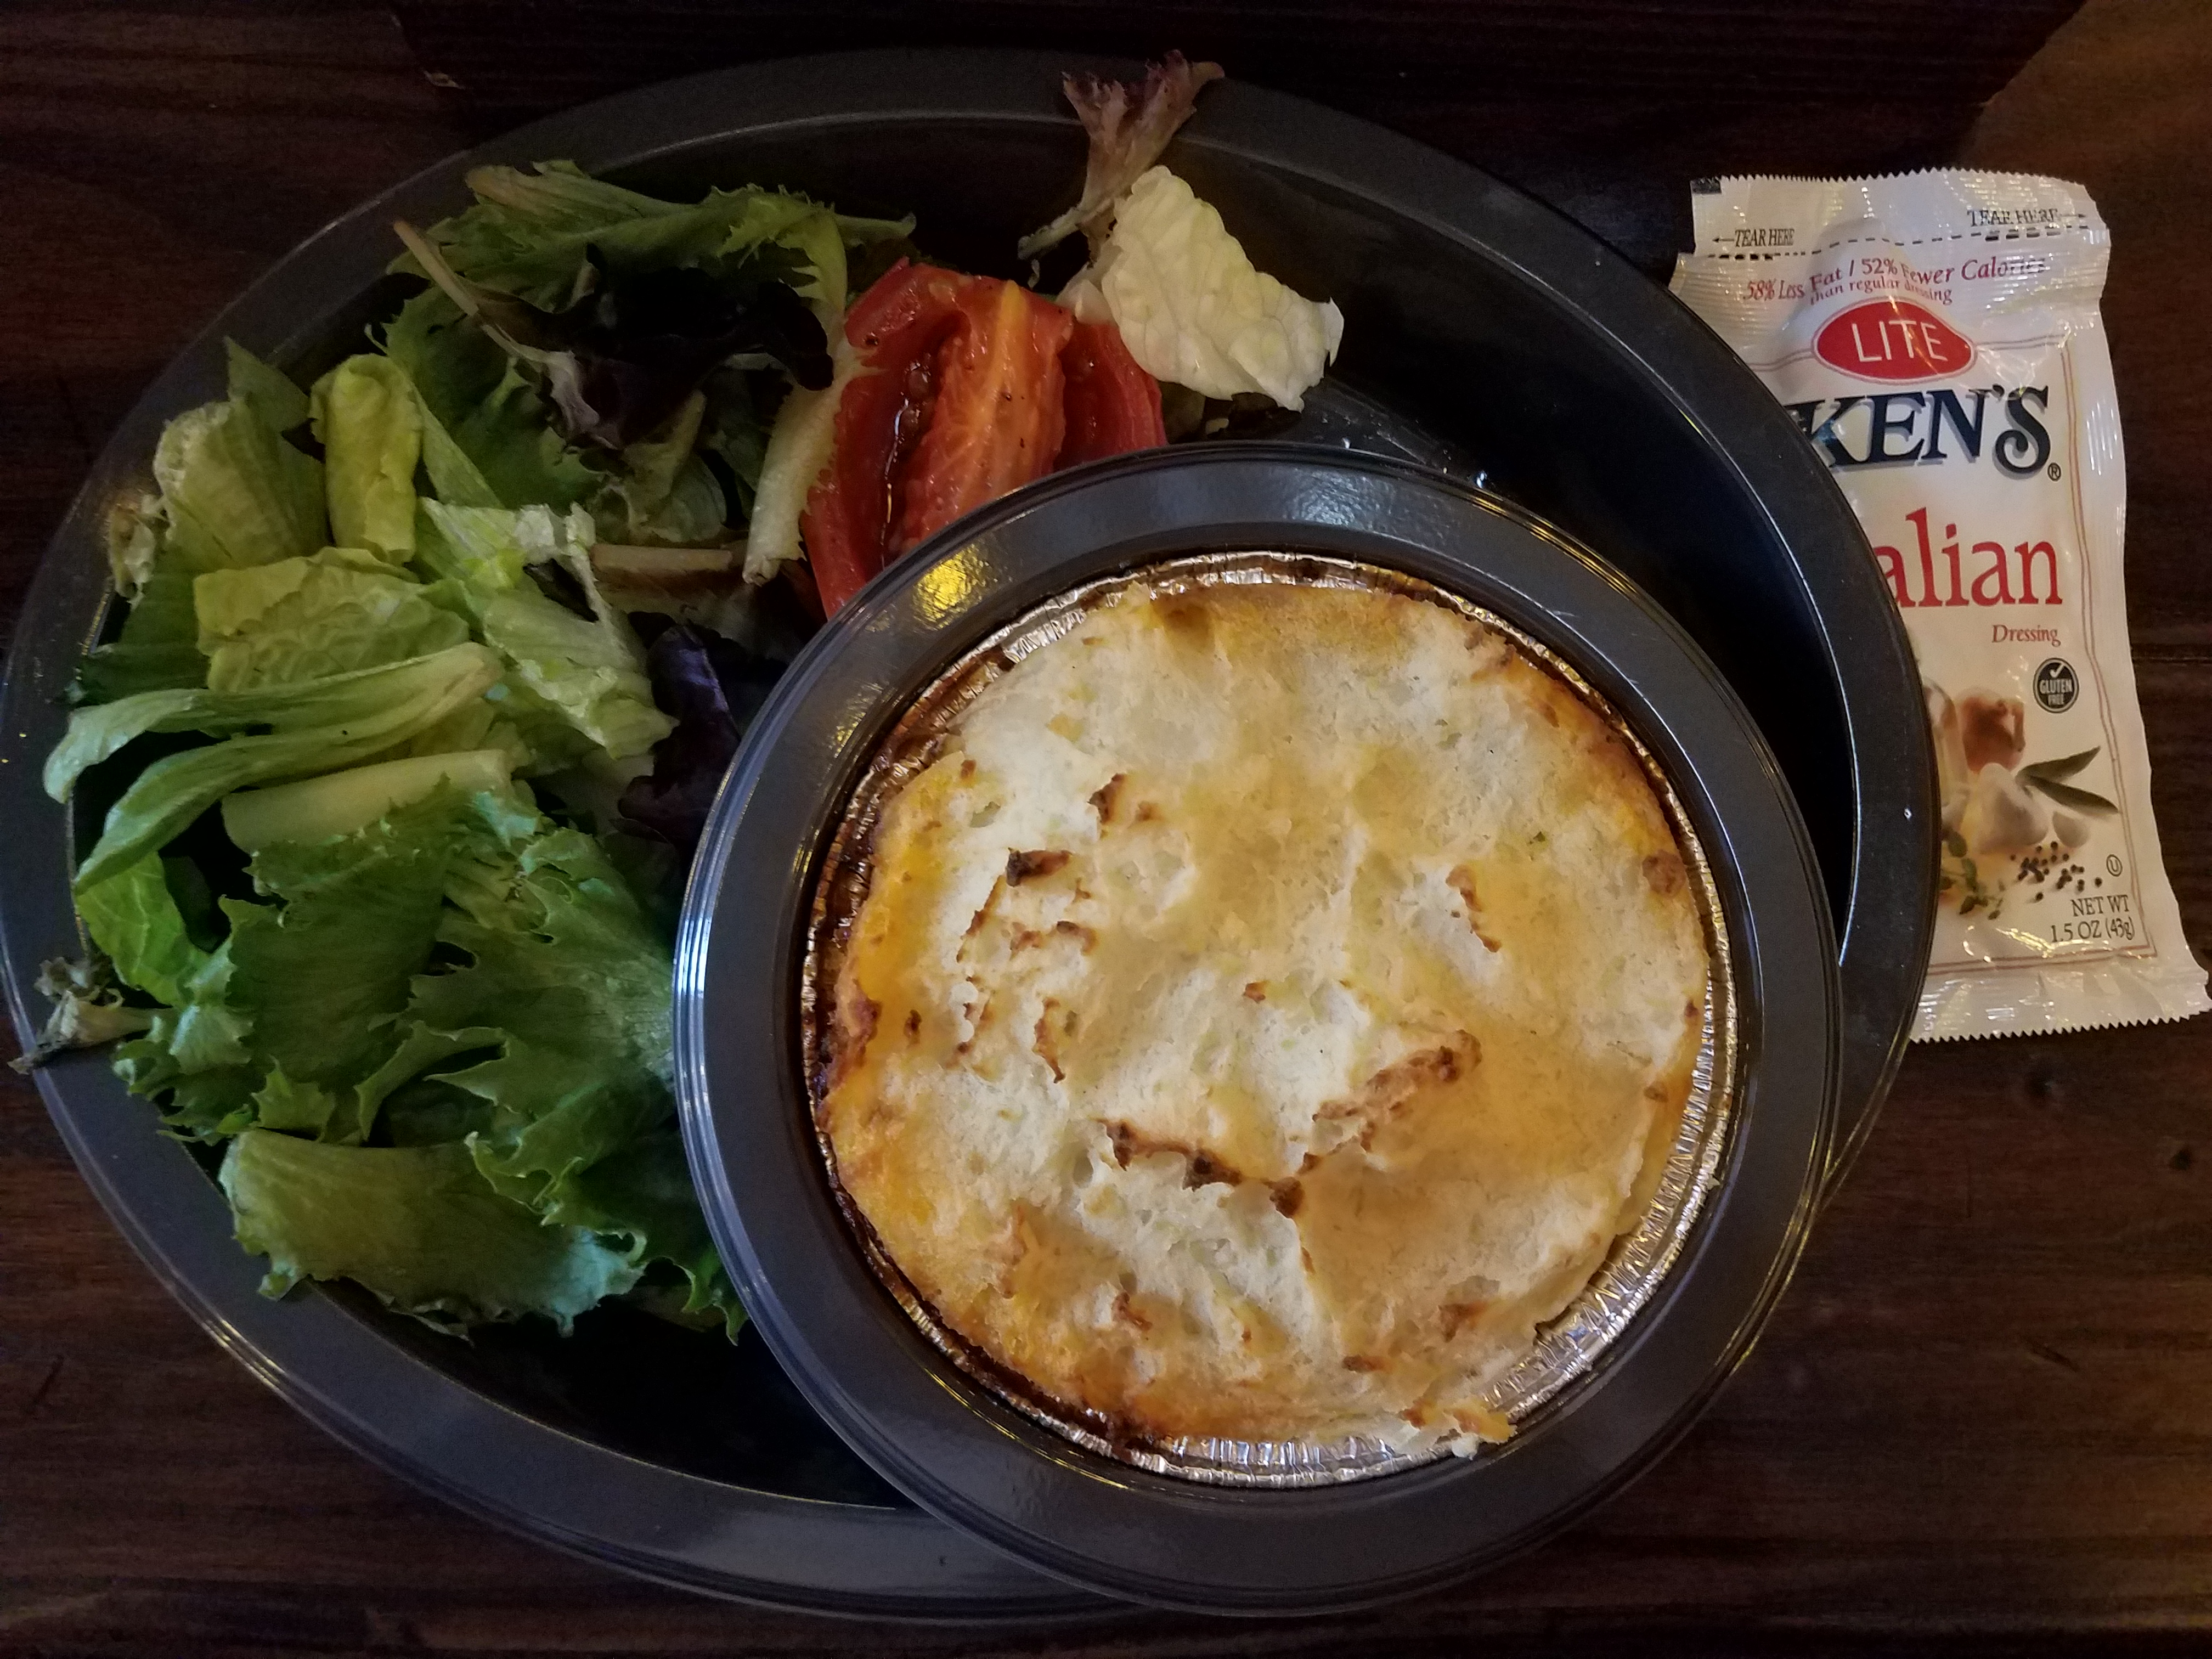 Cottage Pie with a garden salad - dining review of the Leaky Cauldron in Diagon Alley - Orlando, Florida - by unofficialuniversal.com.